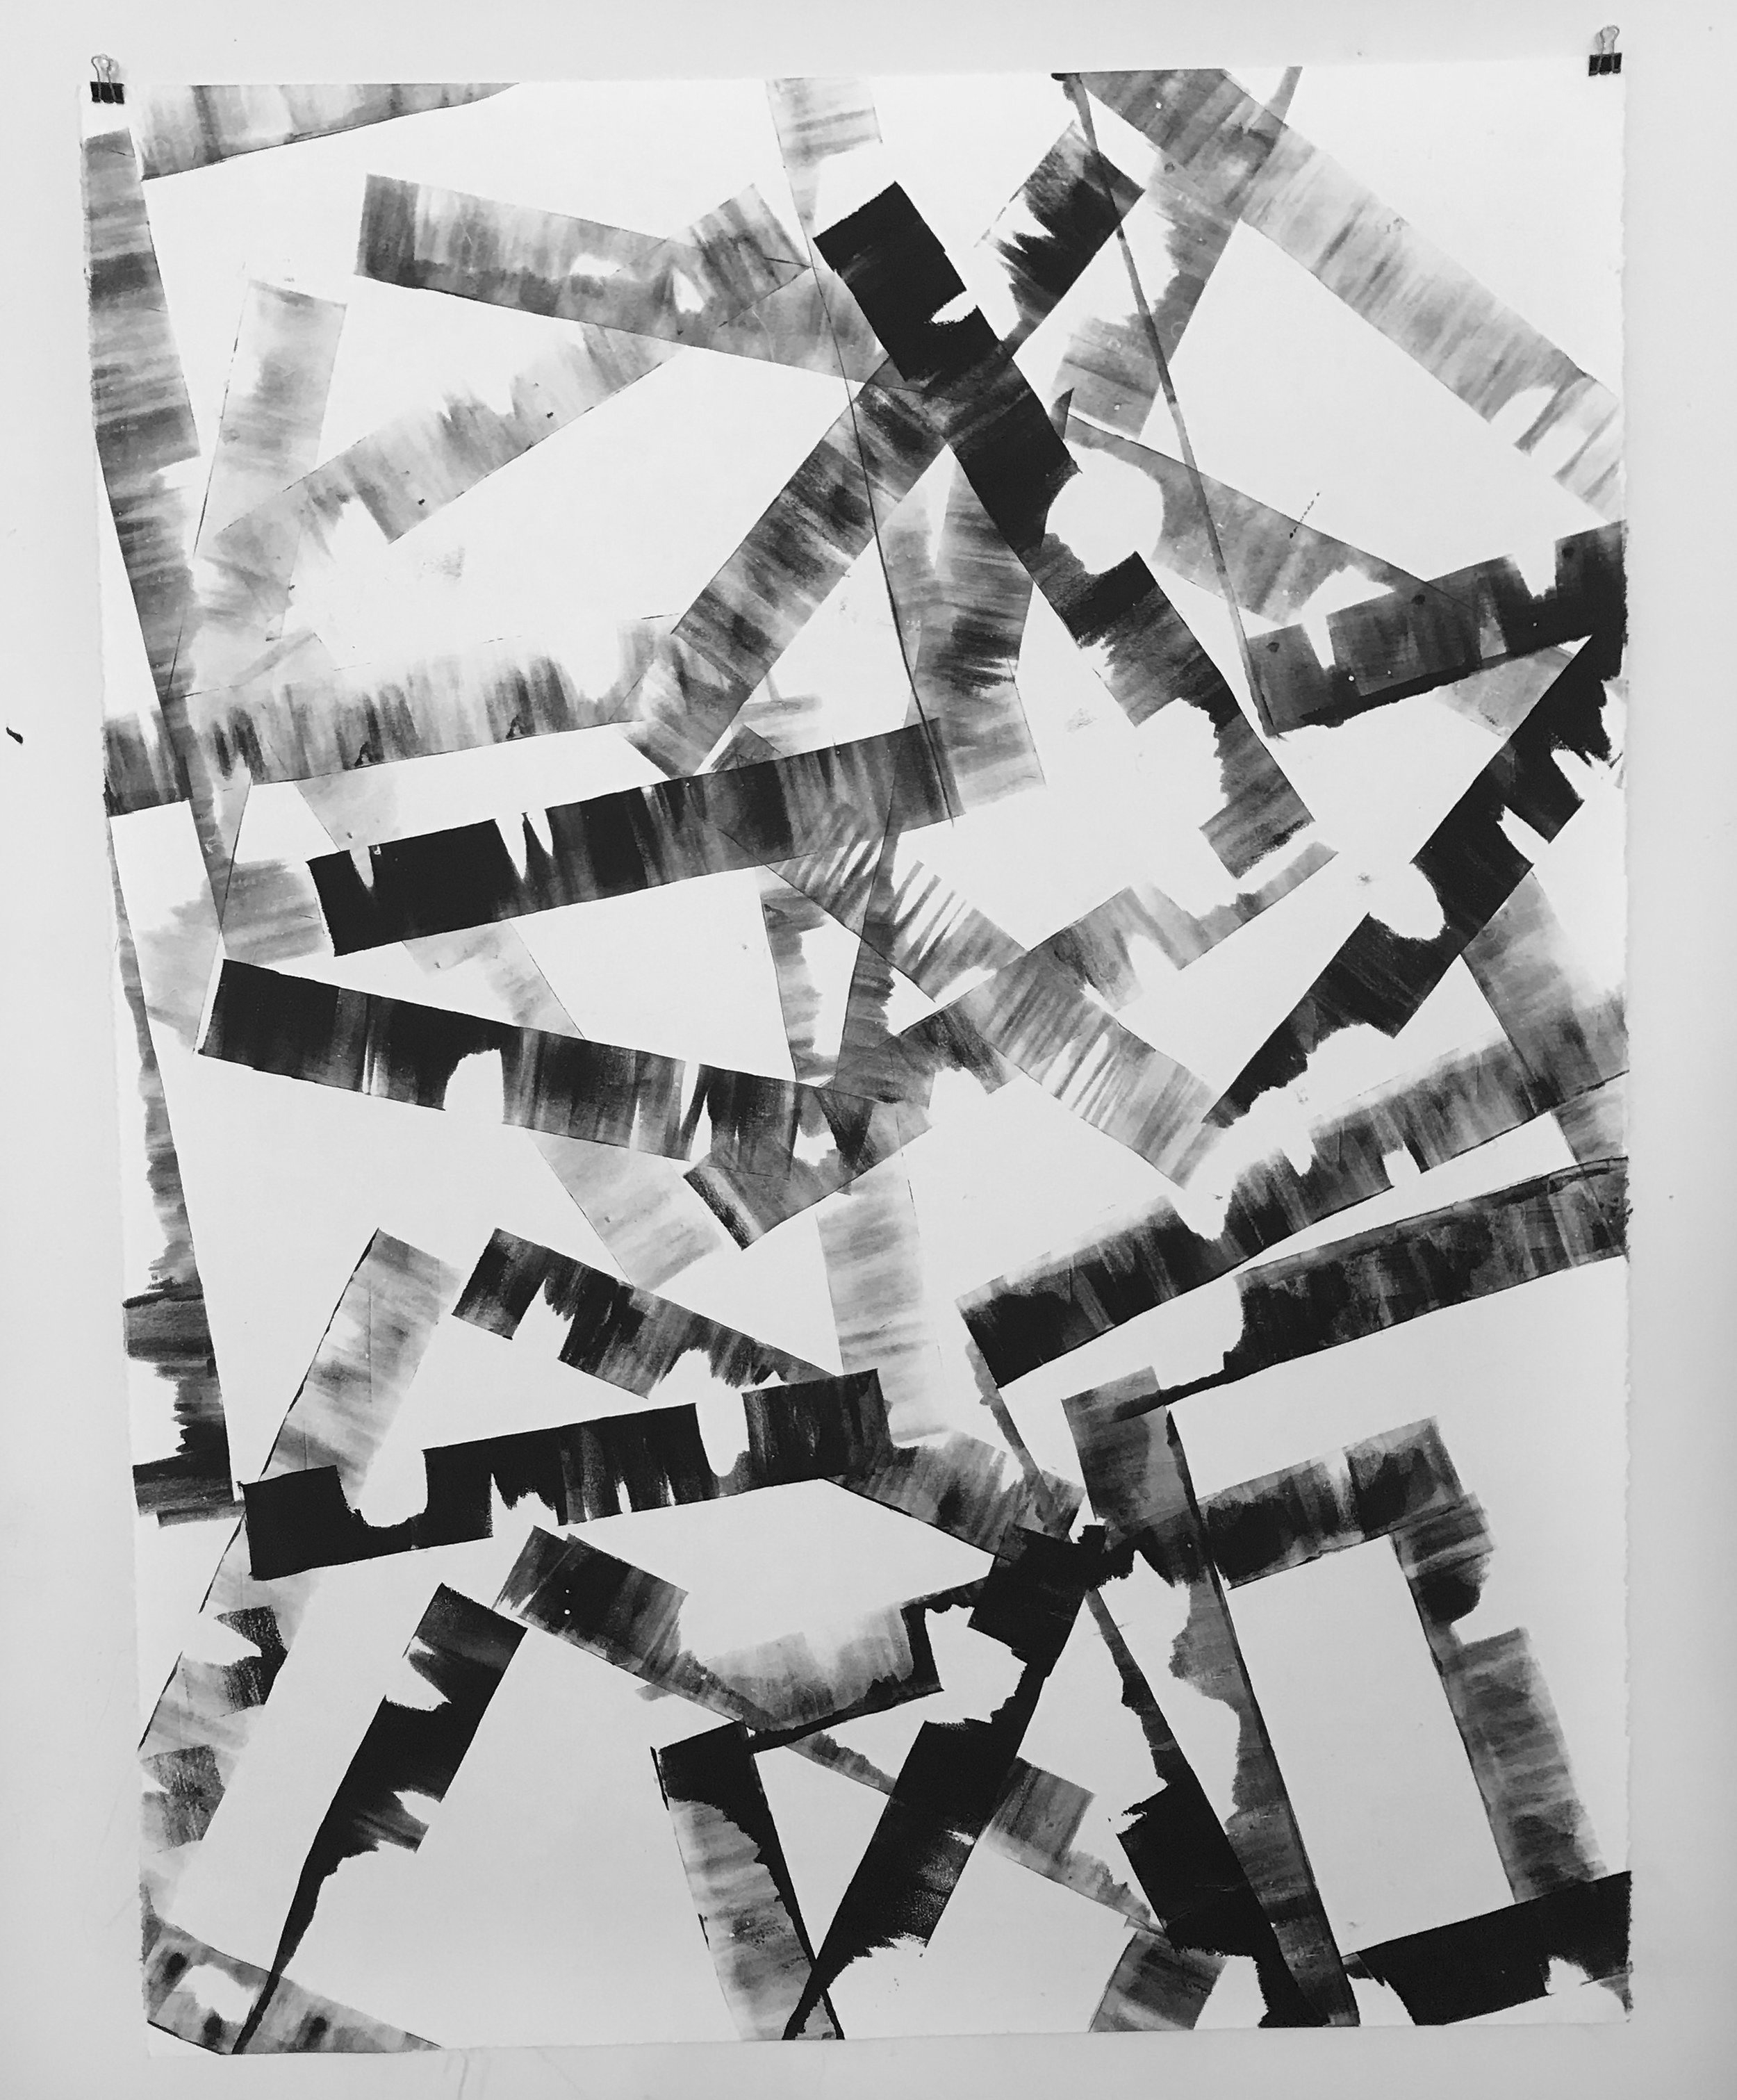  Frames Within A Frame, 2019, Litho ink on paper, 50 x 38 inches (unframed) 